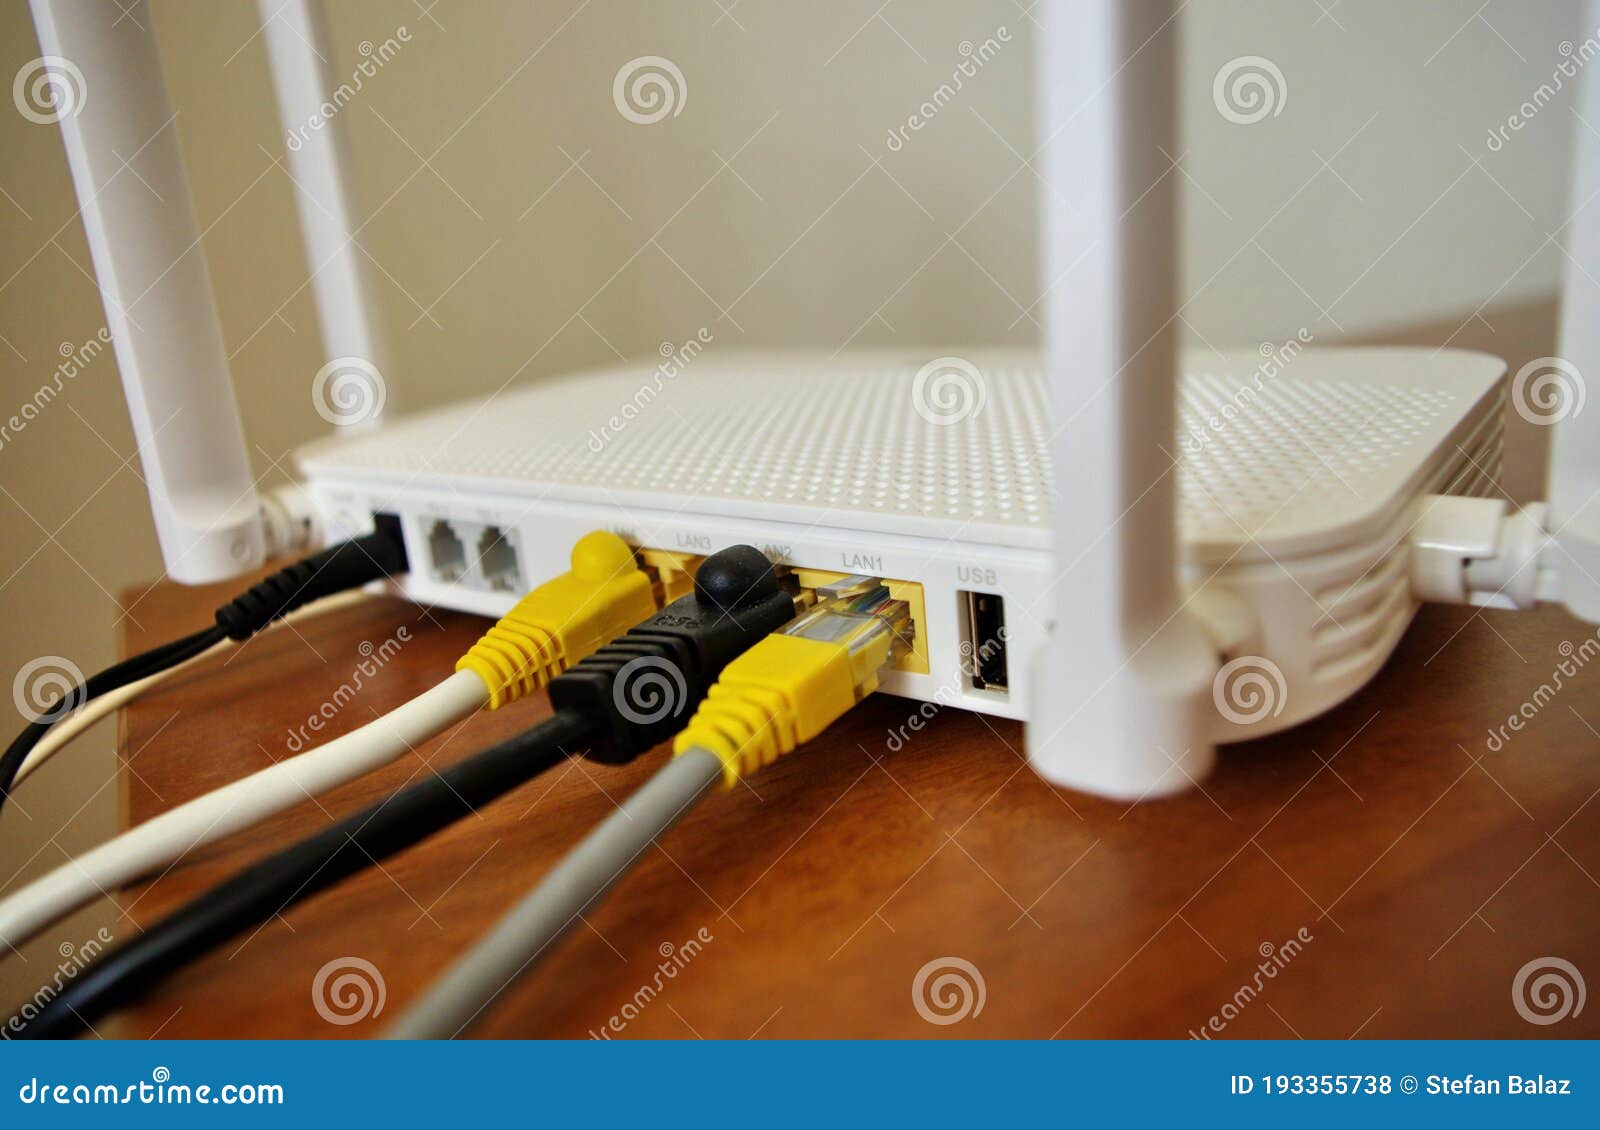 Respond Accompany Lean Fiber Optic Internet. Network Cables Connected To a Router, Speed Test  Concept. Wireless Internet Router with Connected Cables. Stock Photo -  Image of internet, electric: 193355738